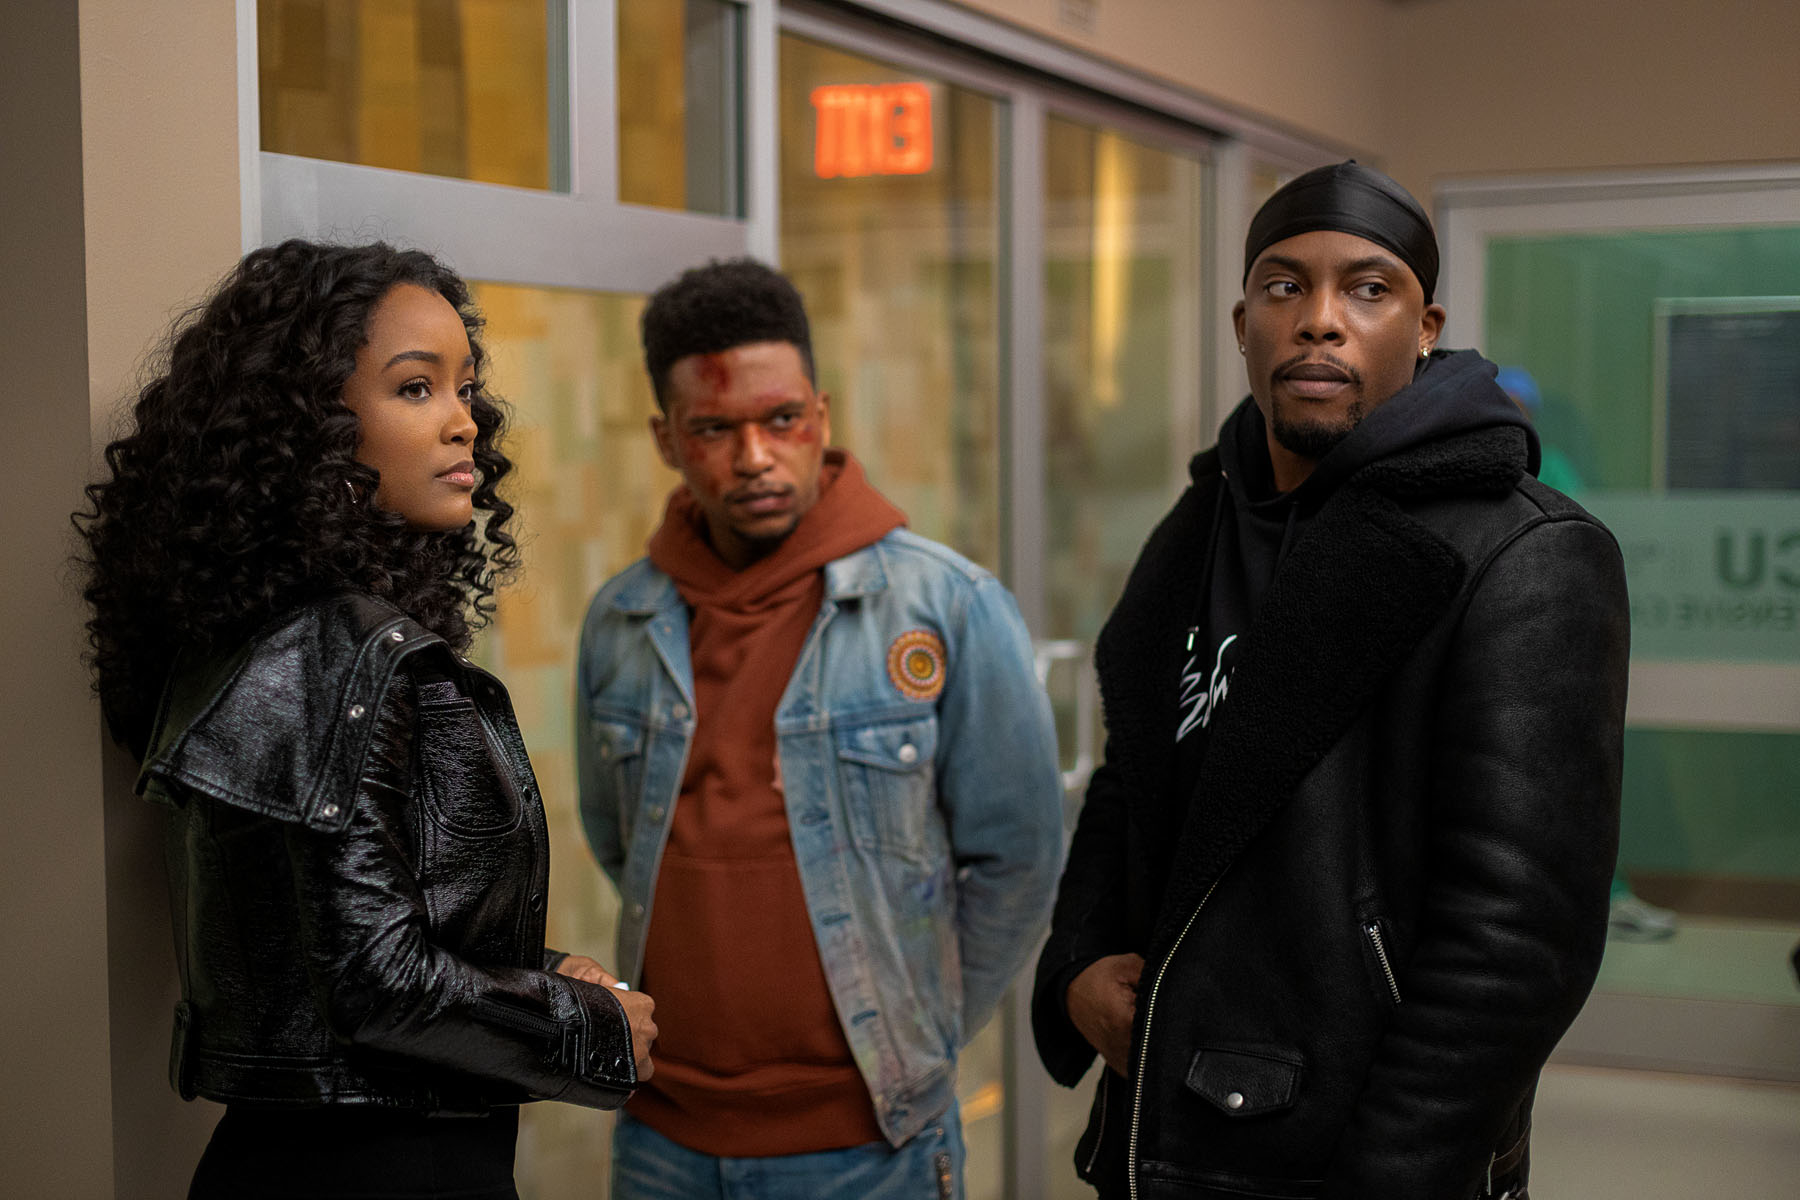 Three actors standing in a hallway, with a man on the right side wearing a hoodie and jacket, and a woman on the left side wearing a leather jacket